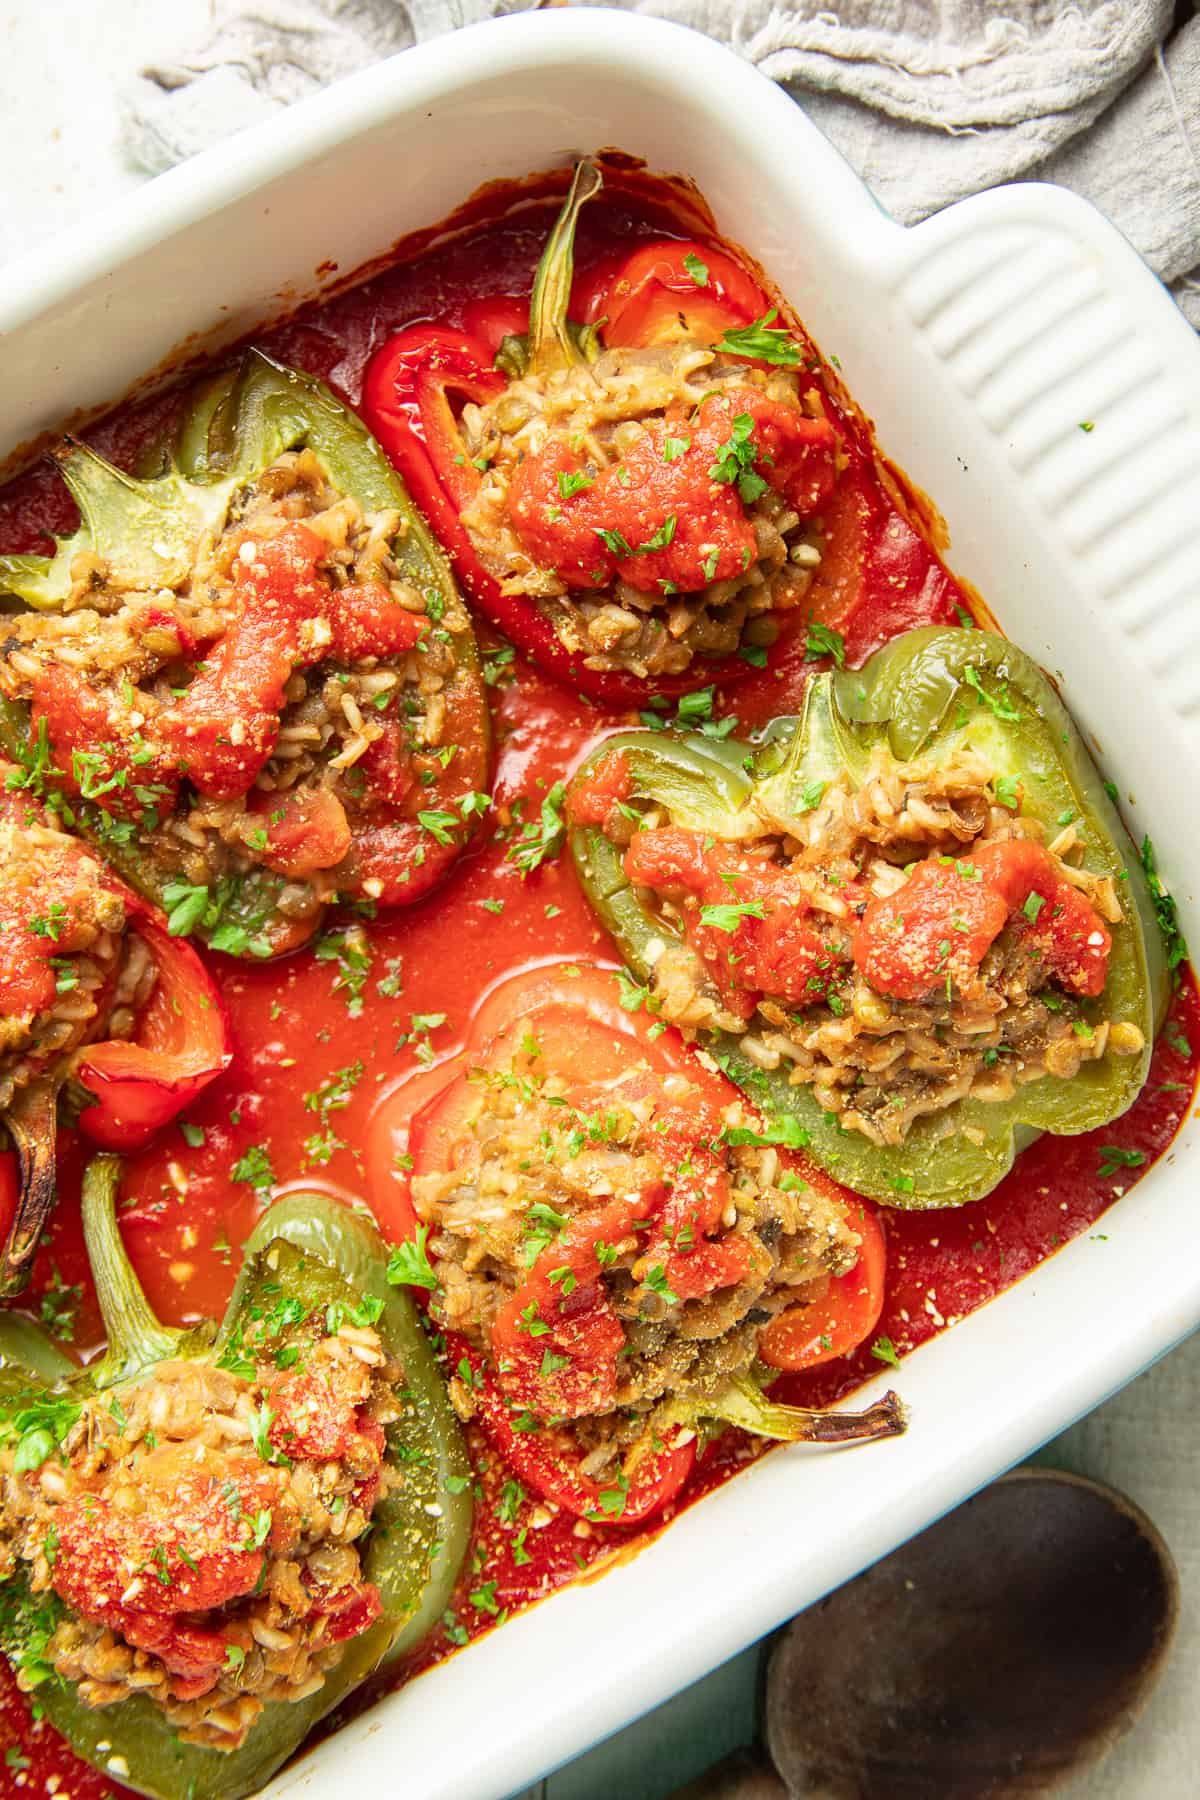 Baking dish filled with Vegan Stuffed Peppers with a spoon on the side.